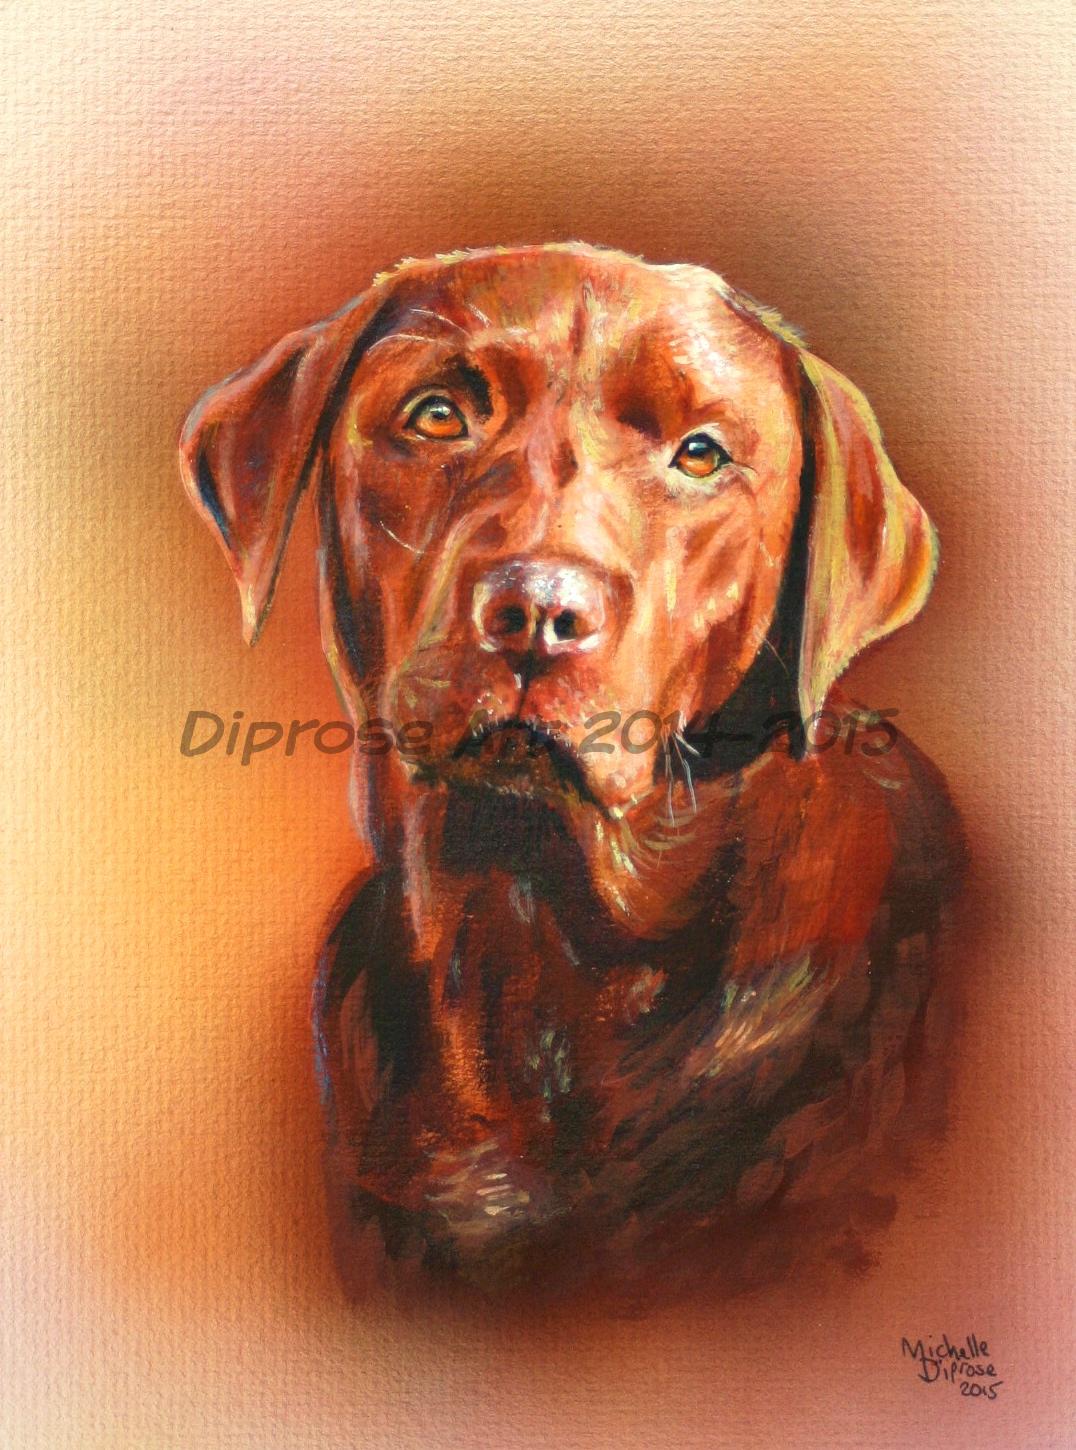 Acrylics on board - approx A4 - pet dog portrait - I love chocolate! and it&#039;s great to paint too . . . lovely shades and hues